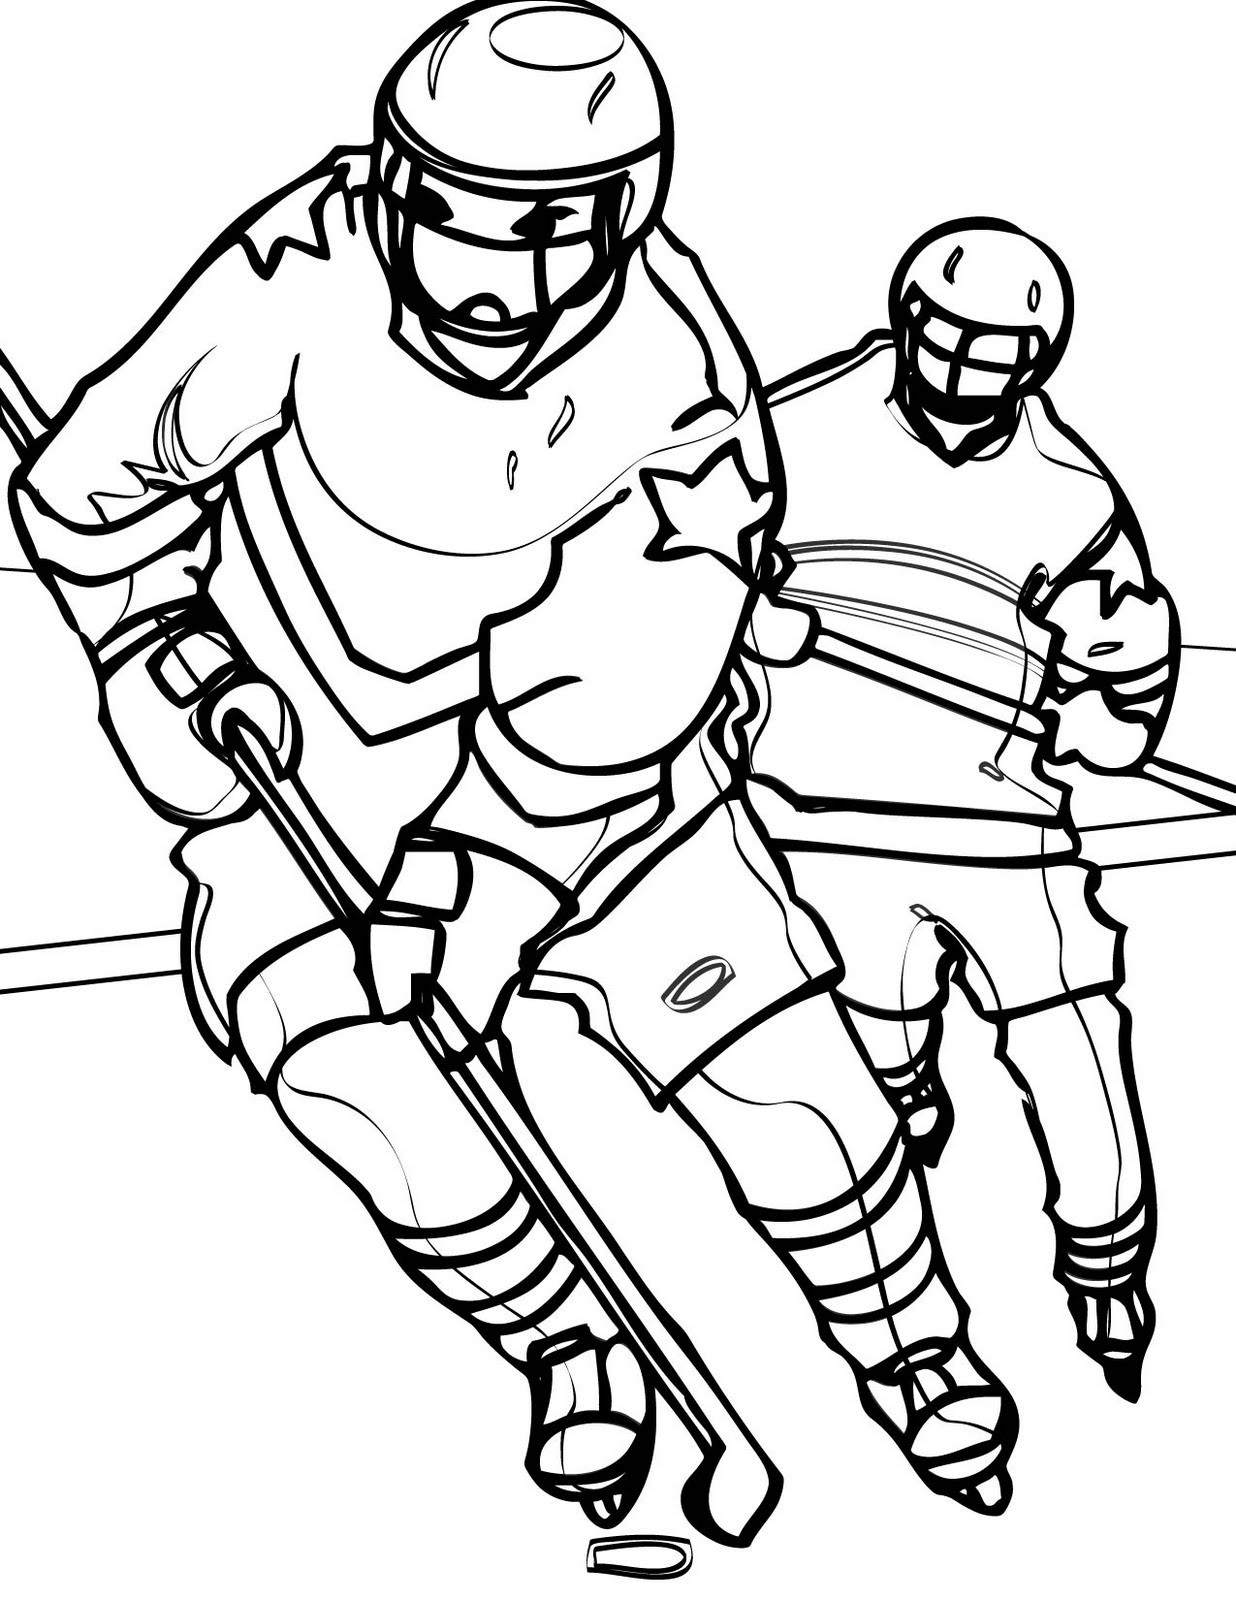 Sports Coloring Pages For Adults
 Hockey Coloring Pages